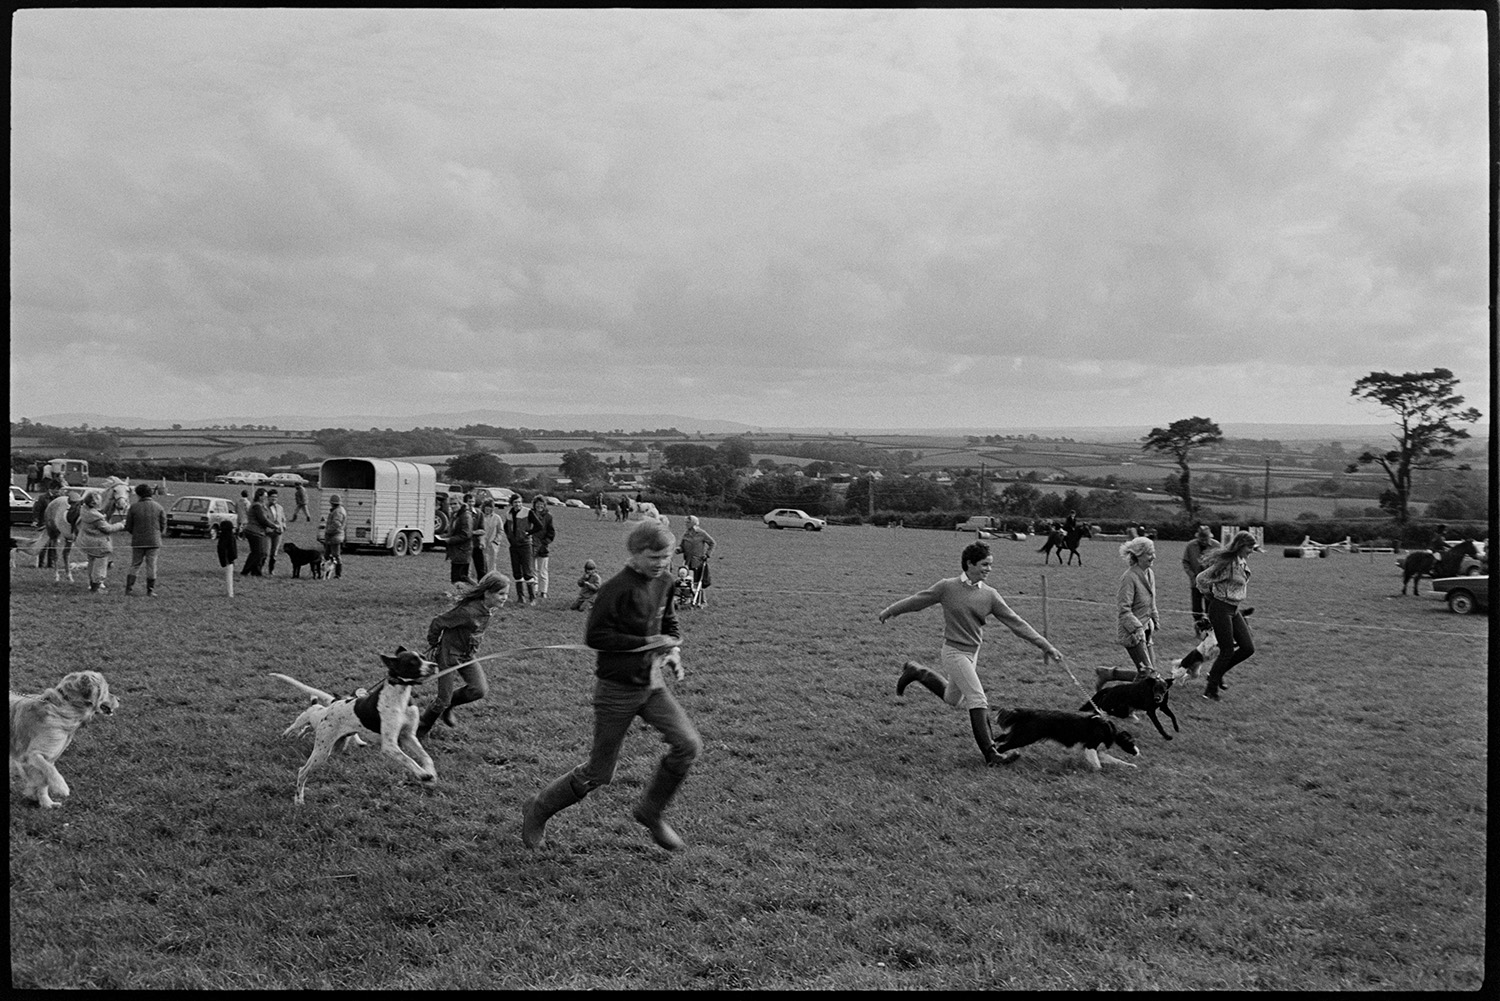 Dogs and owners at dog show, being judged.
[Dog owners running with dogs on leads at a dog show in a field at Dolton Gymkhana. Men, women and children are watching. In the background horses are being ridden across the field, and horse boxes, parked cars and a view of the surrounding countryside are visible.]